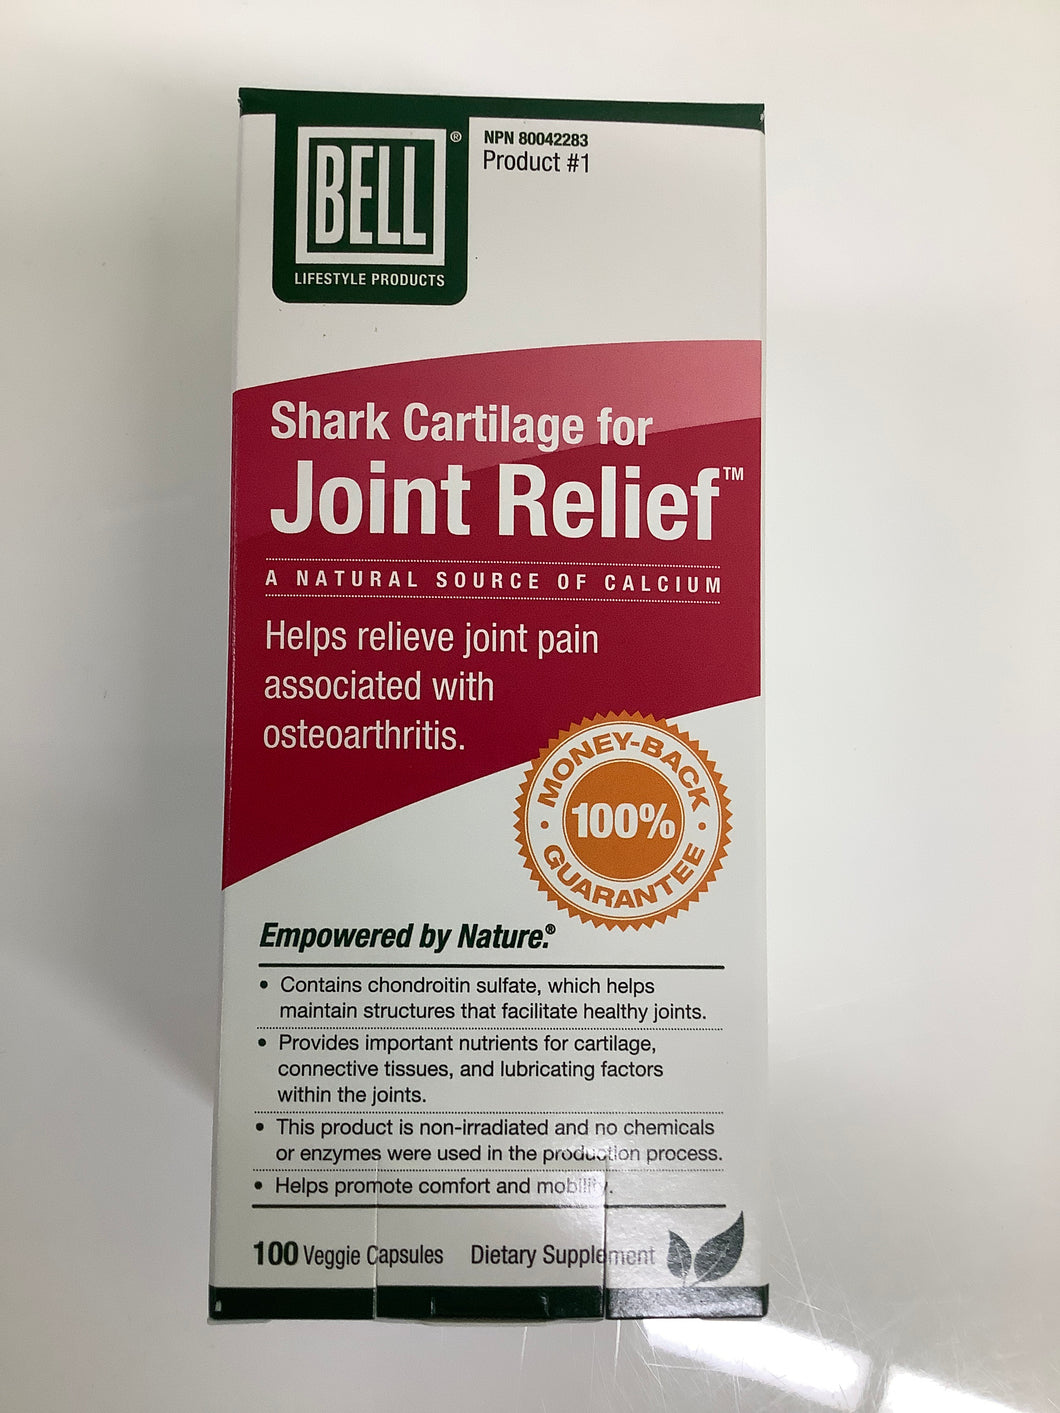 Bell Shark Cartilage Joint Relief #1